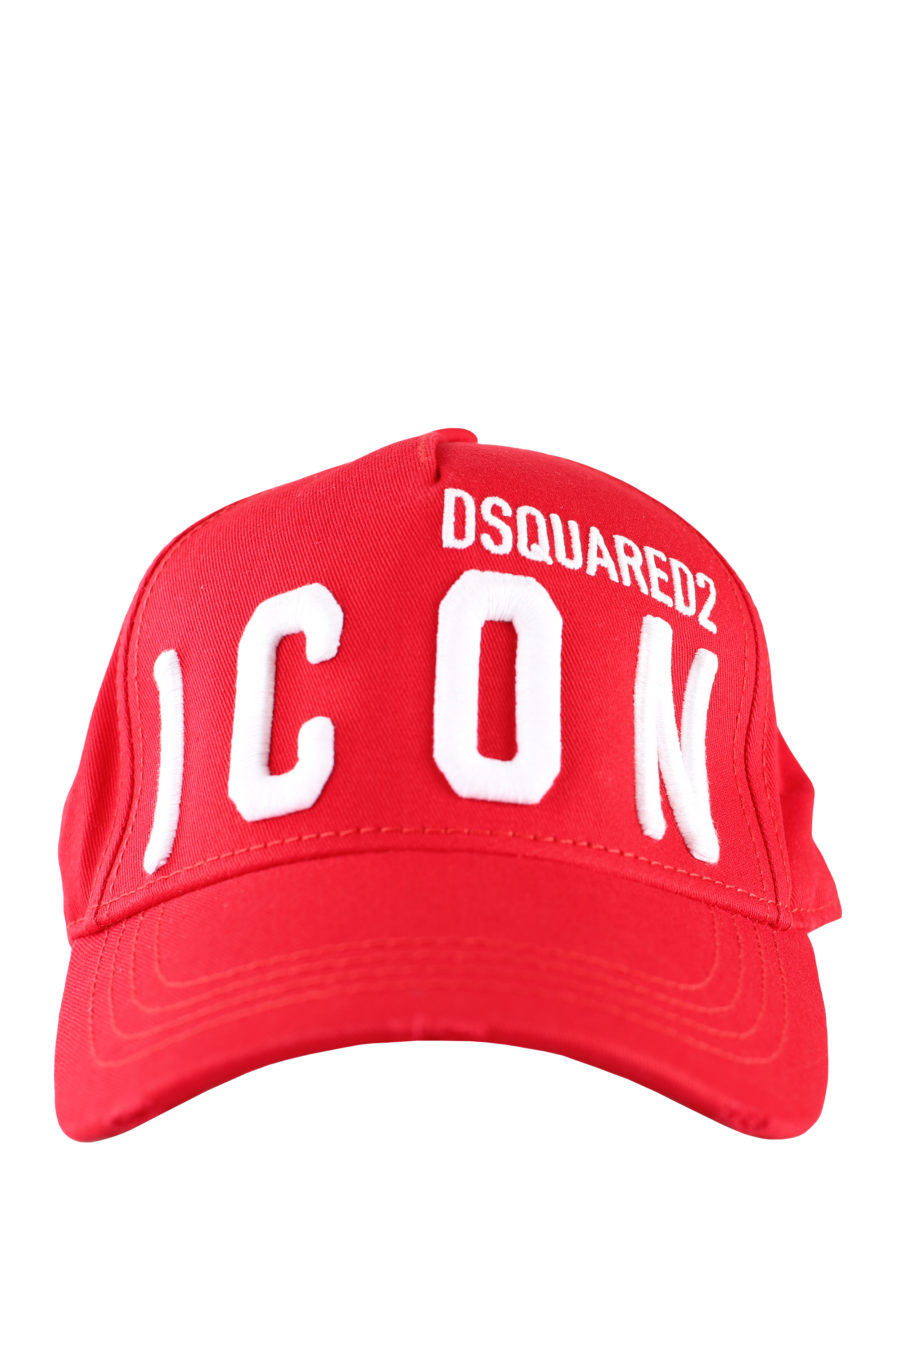 Adjustable red cap with white "icon" logo - IMG 0054